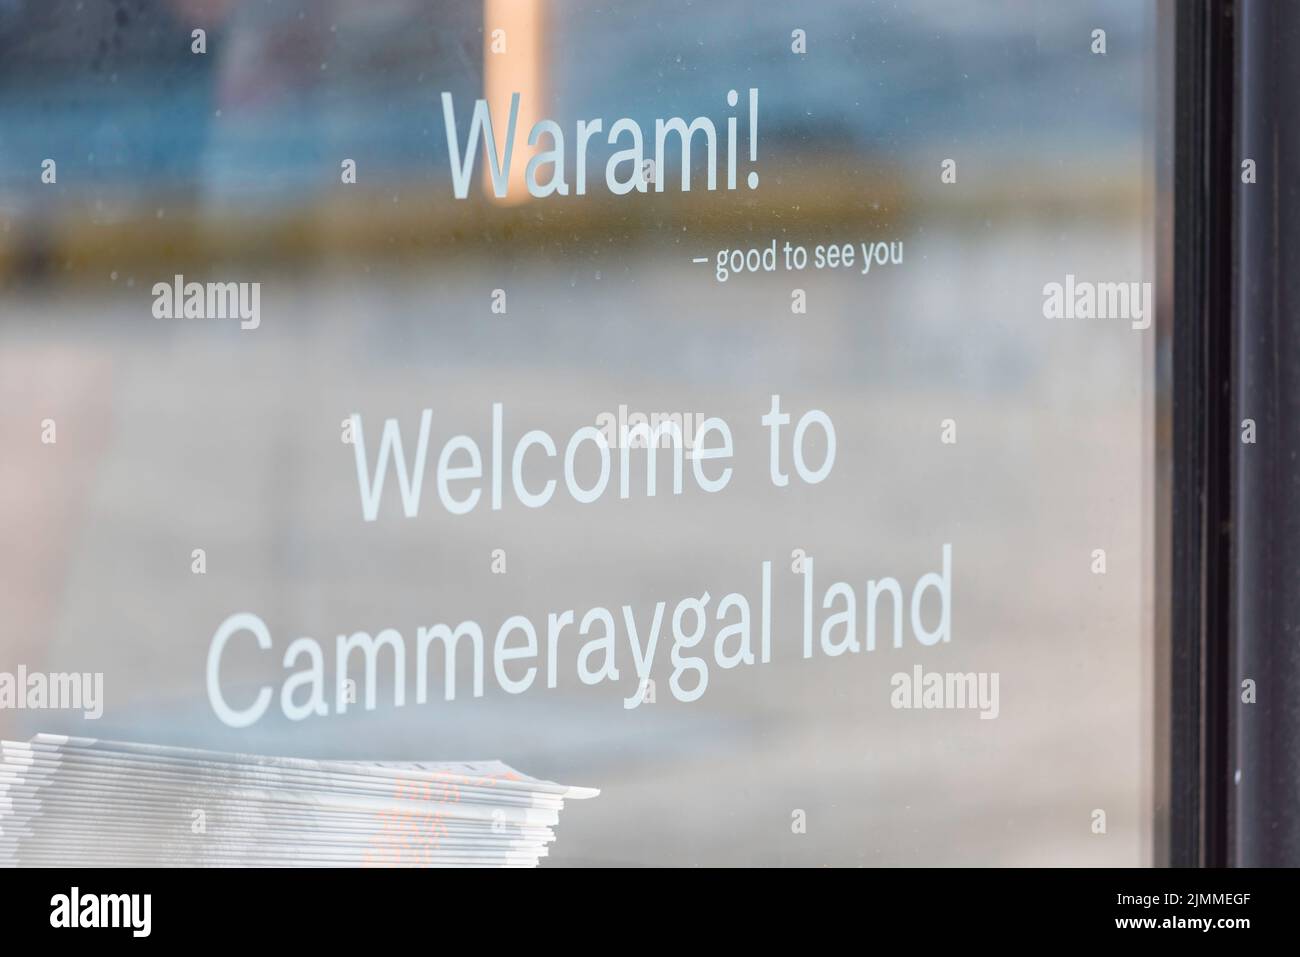 A sign on a shop window using local Aboriginal indigenous peoples language 'Warami' meaning 'good to see you' on Cammeraygal Land in Sydney, Australia Stock Photo